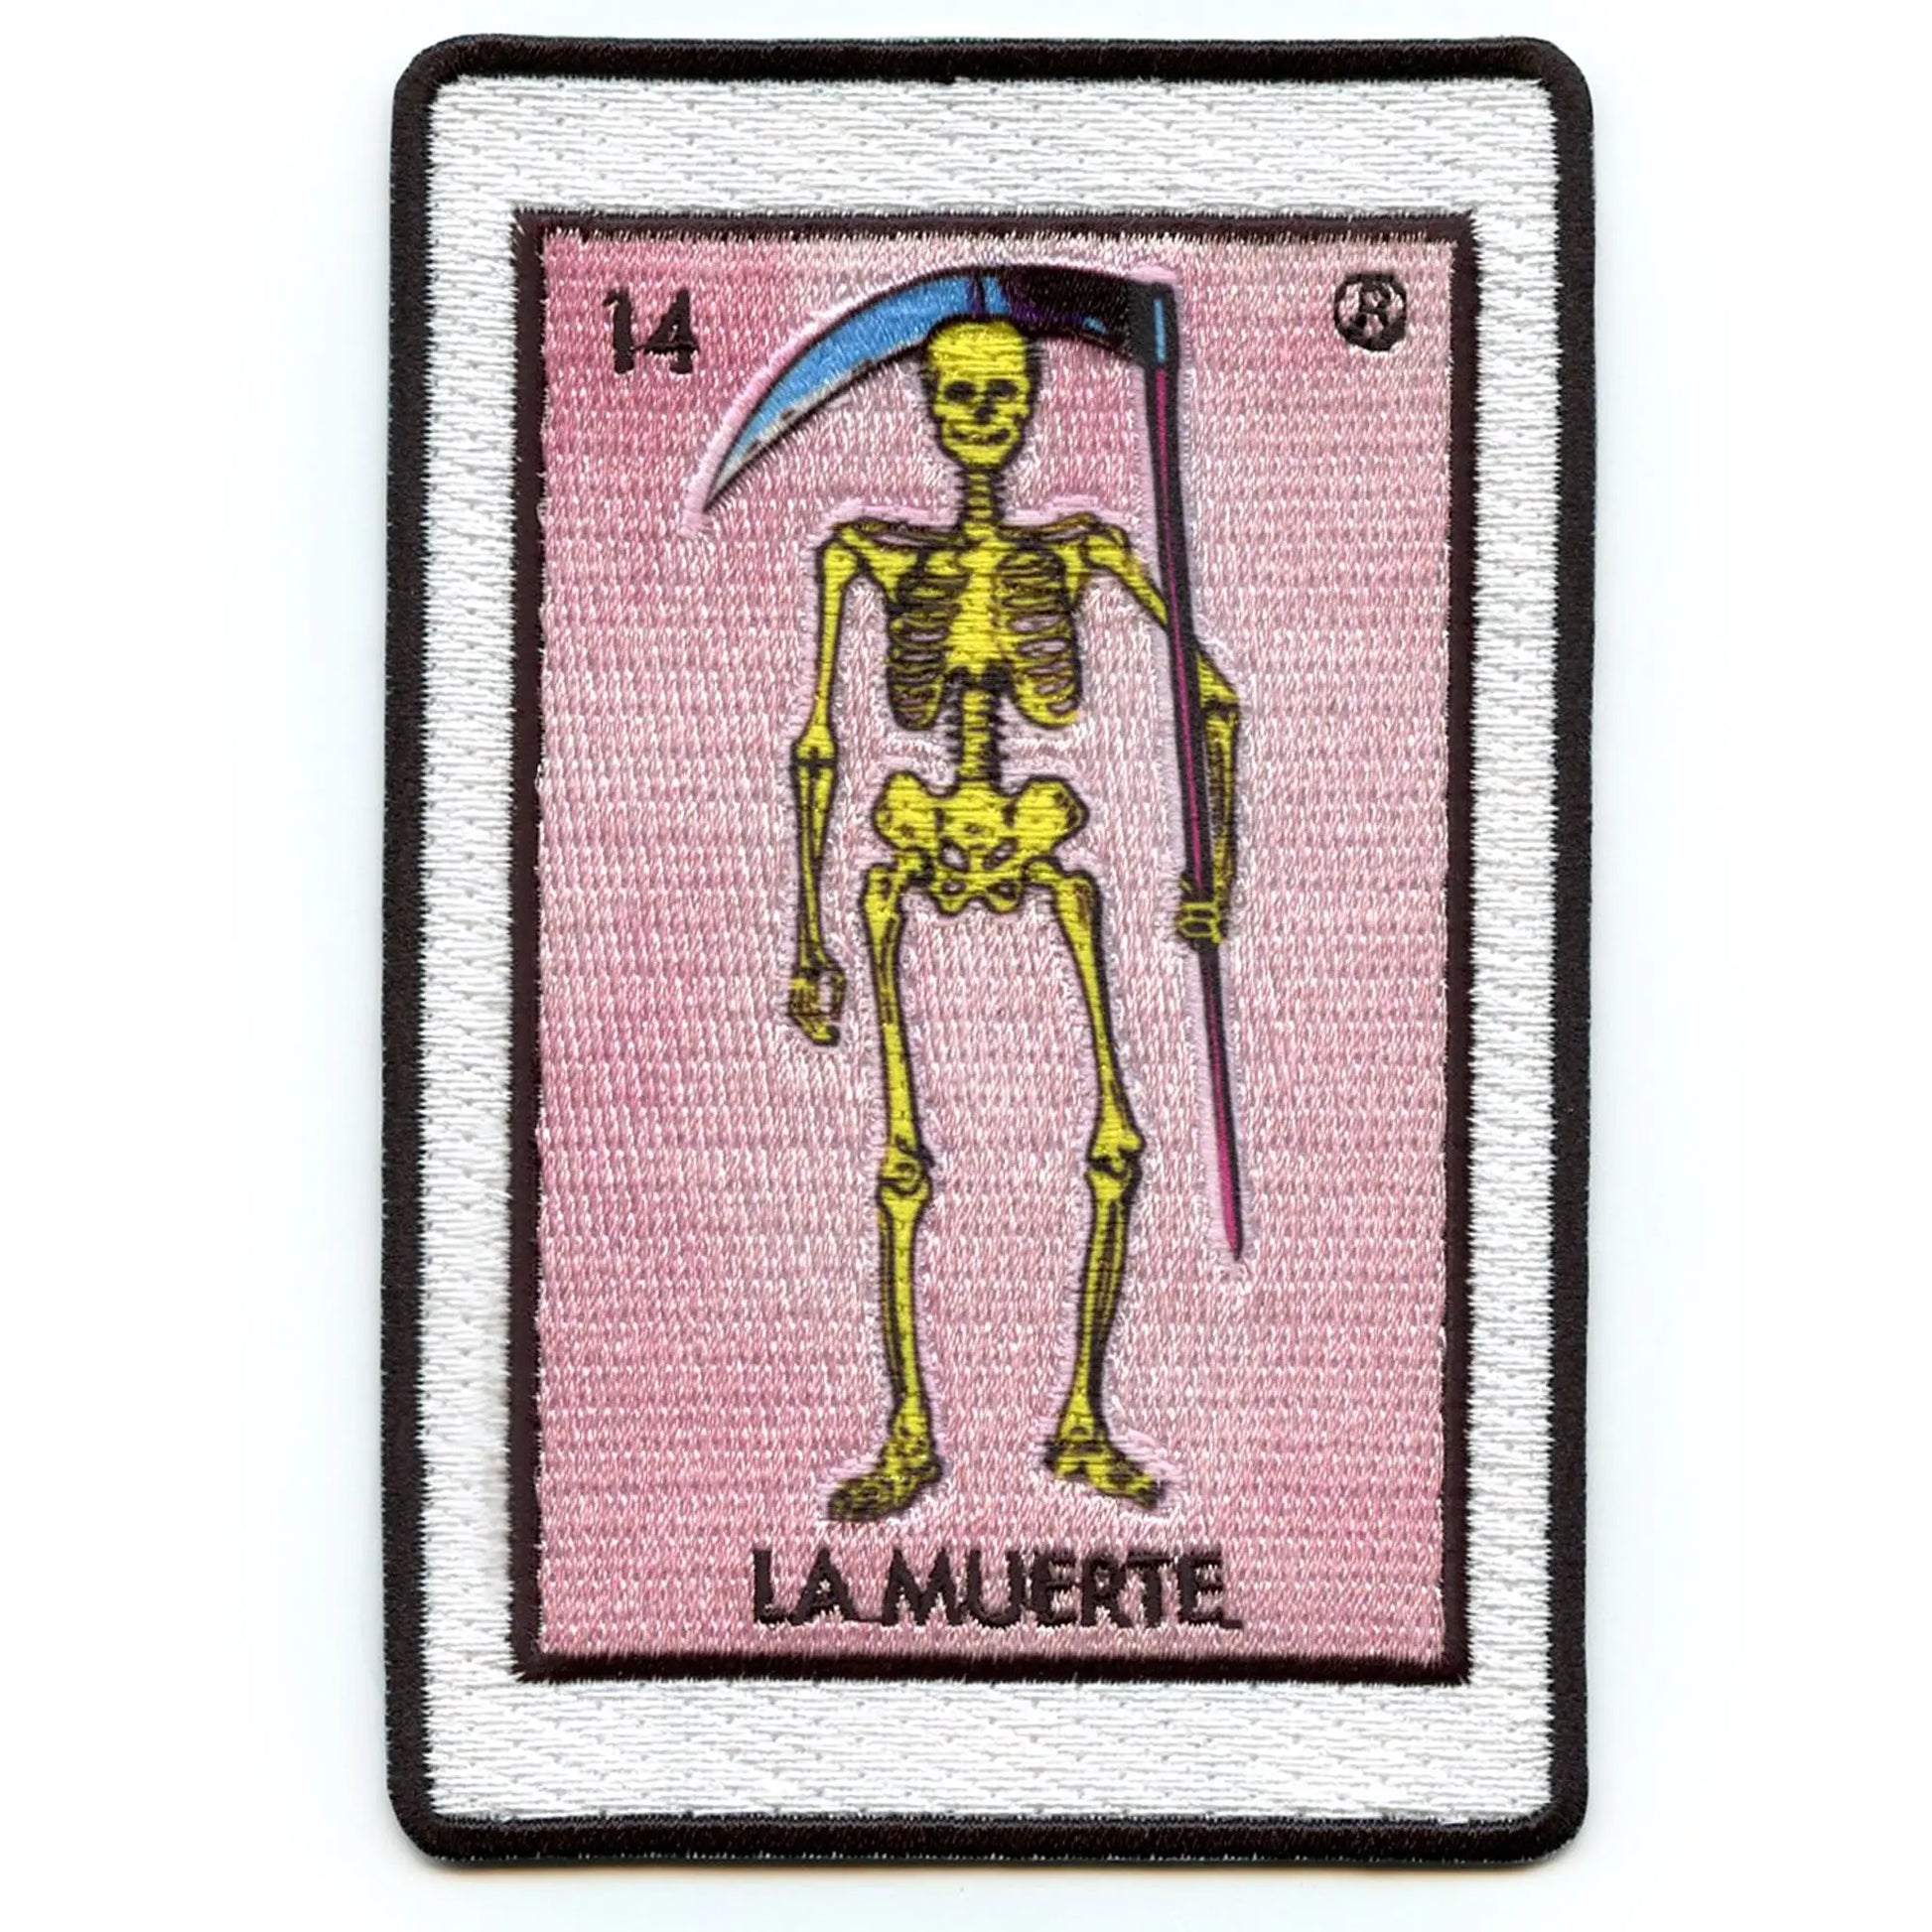 La Muerte 14 Patch Mexican Loteria Card Sublimated Embroidery Iron On